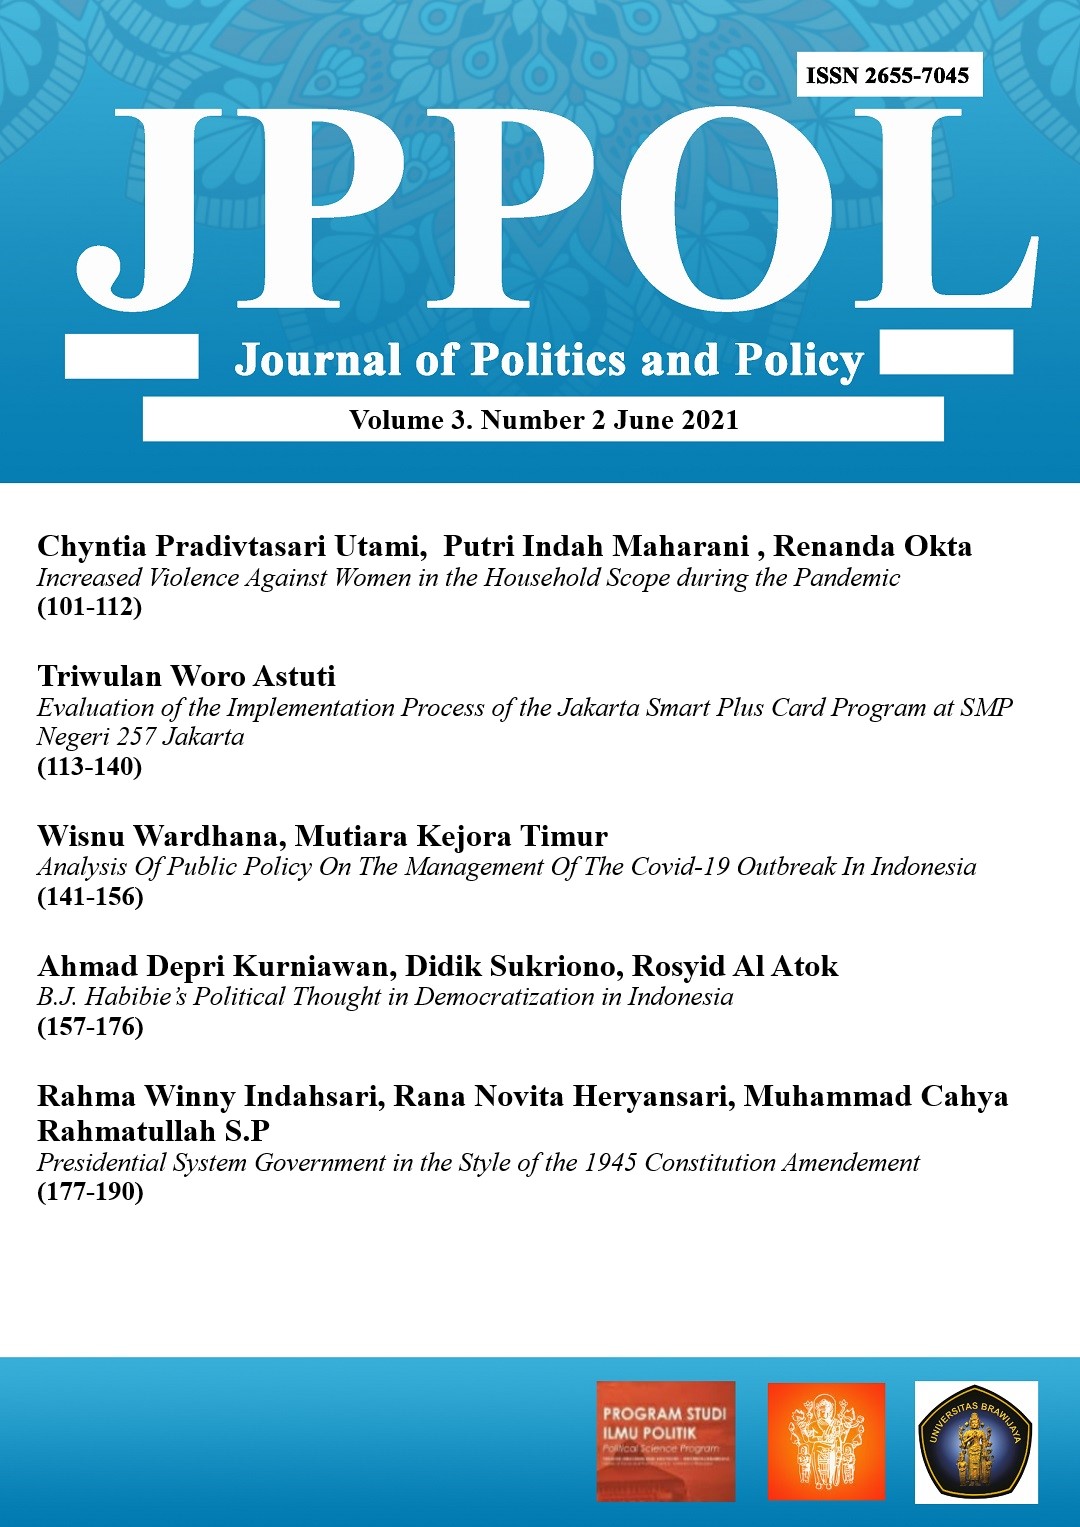 Journal of Politics and Policy